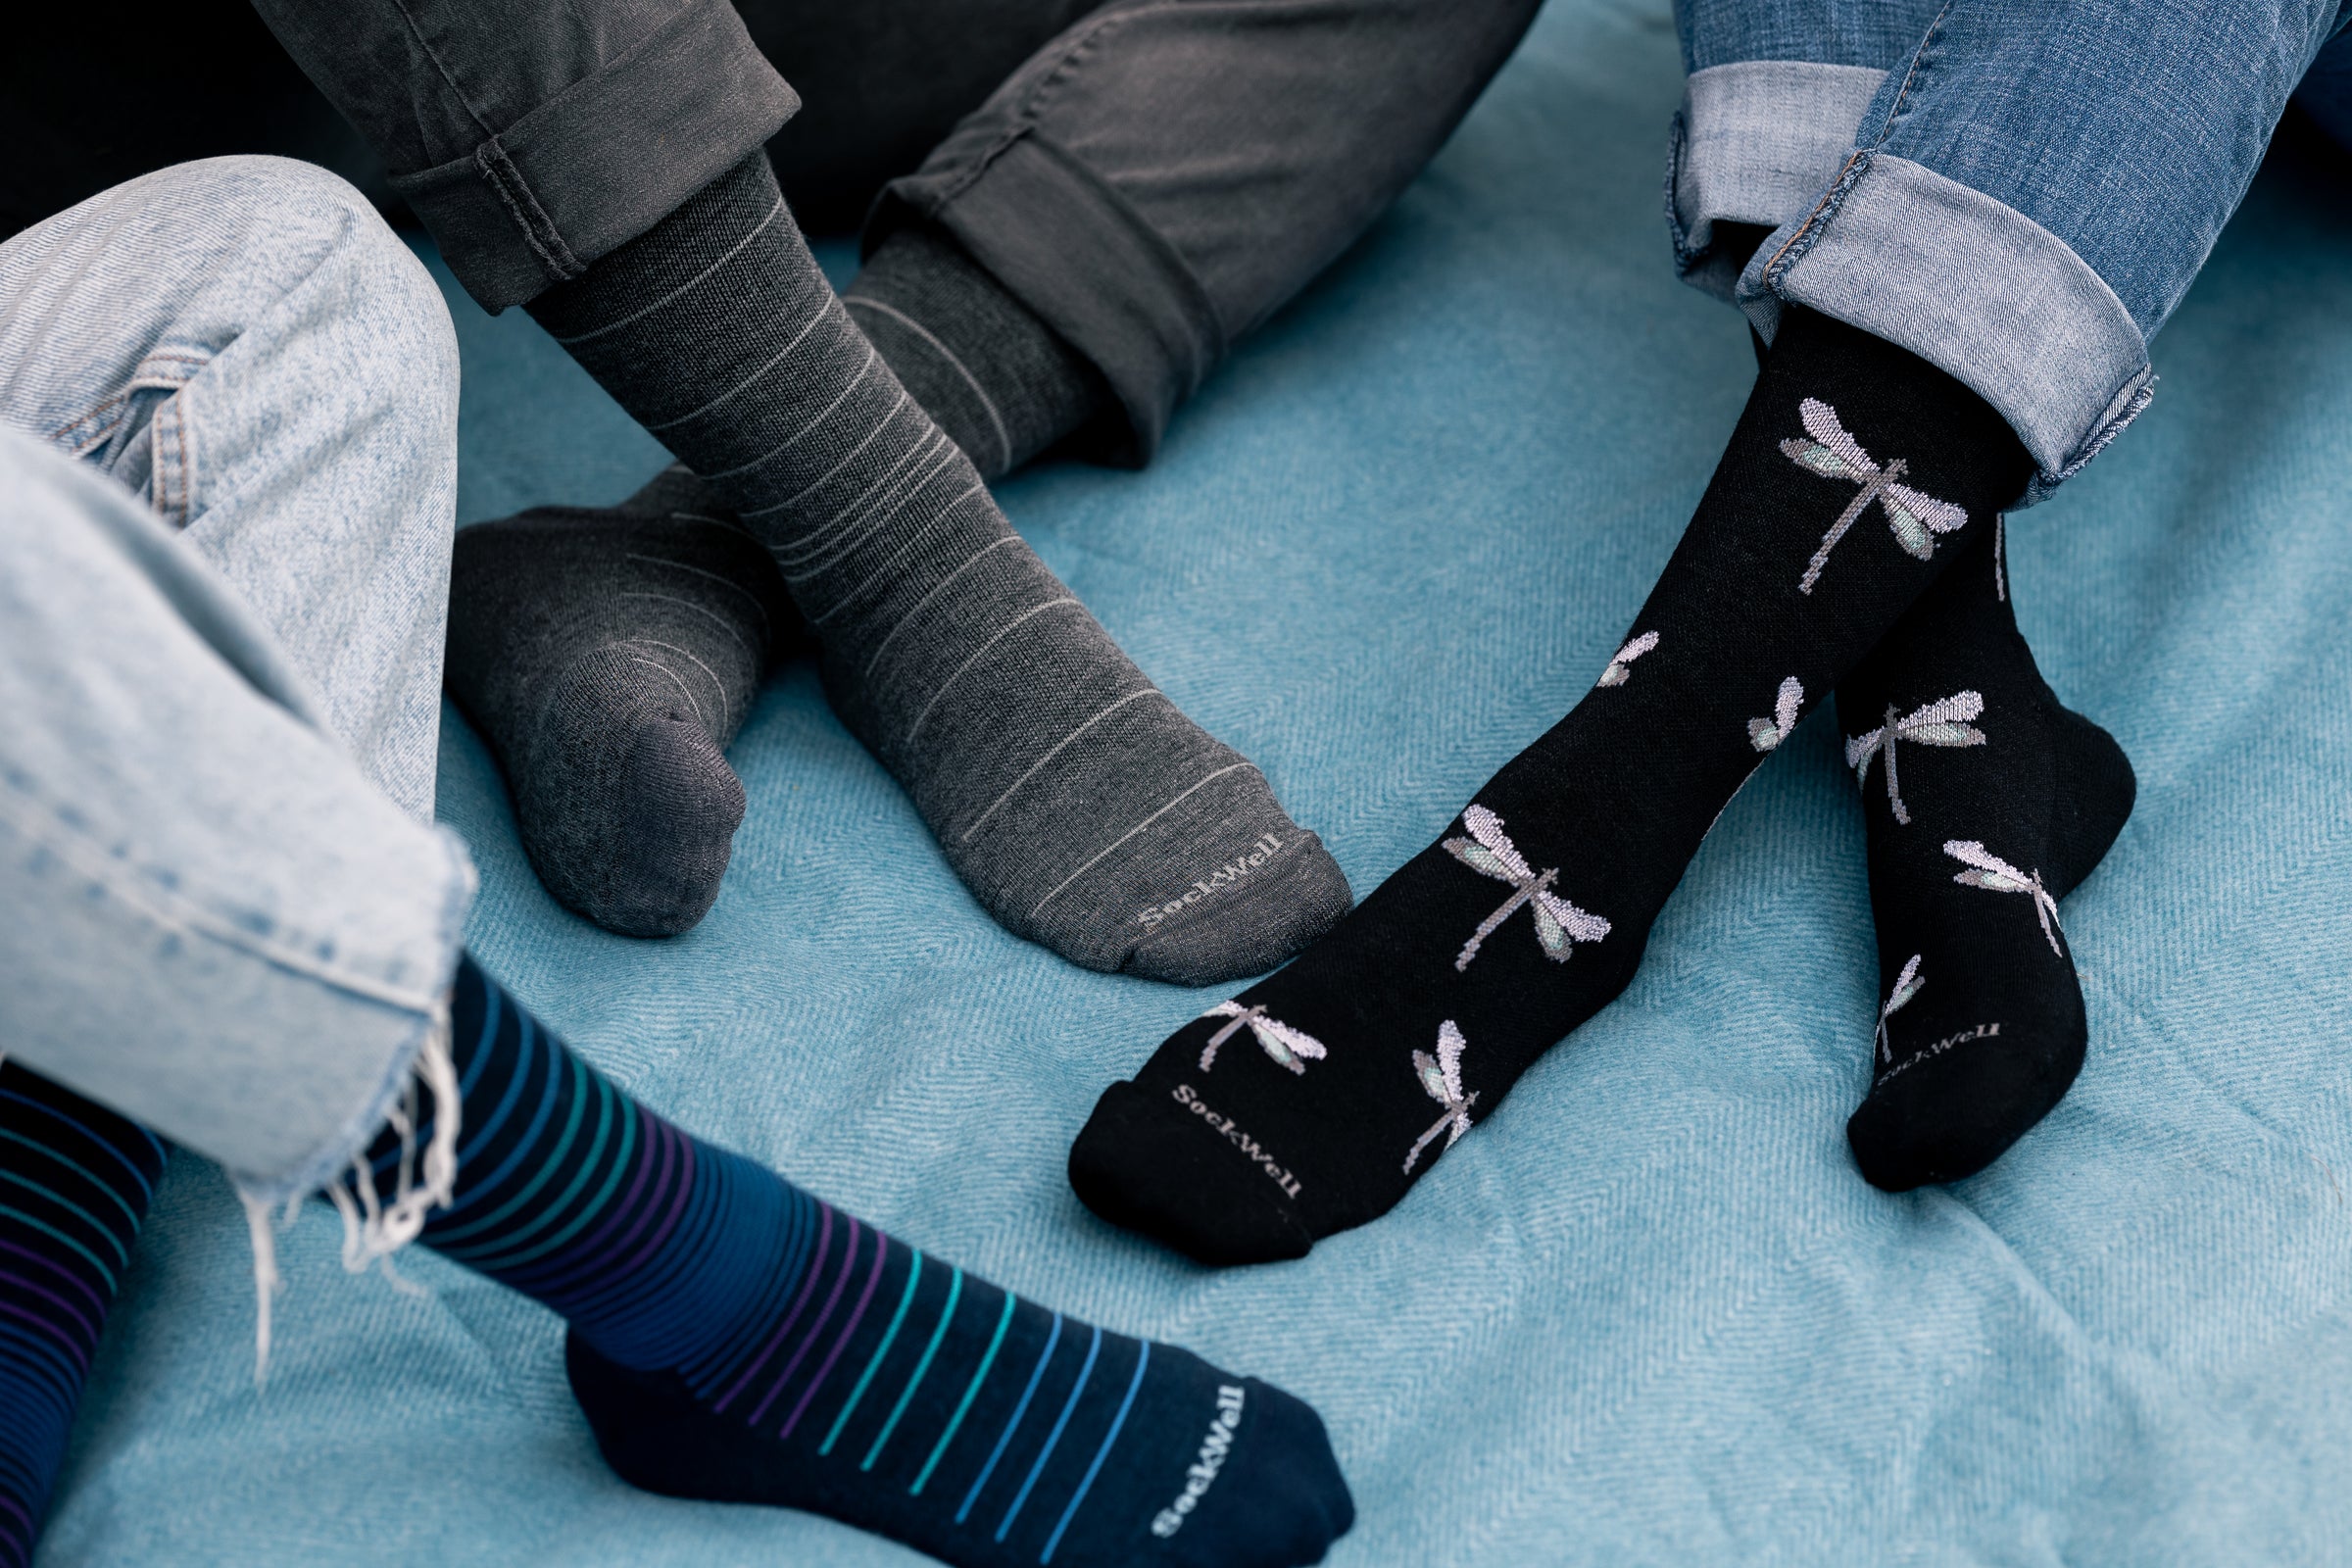 Lifestyle_LC_sw106w_Dragonfly_Black_AND_Sw1w_Circulator_Navy_AND_Sw1m_Circulator_Charcoal_park_Fitness - The Sock Monster